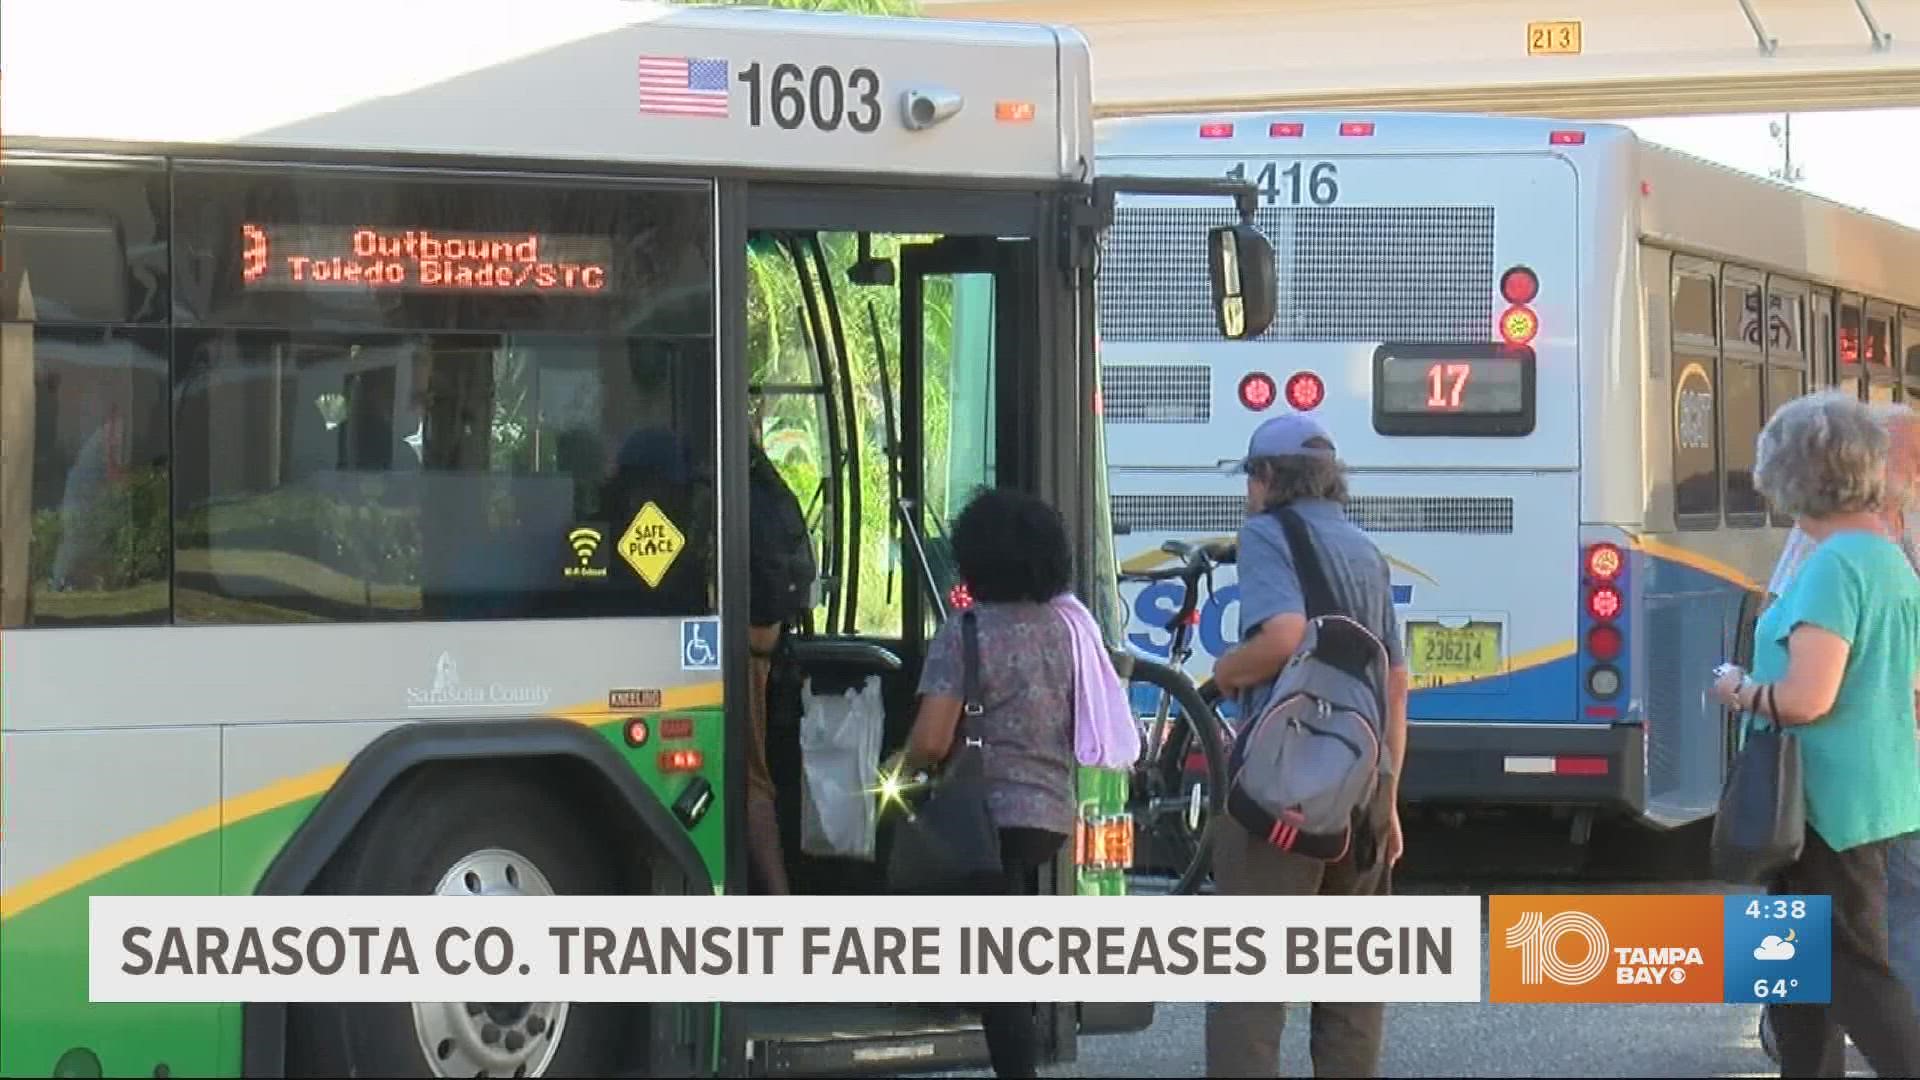 The price increase ranges from 15 to 25 cents. And, the half-priced monthly bus pass will be phased out.